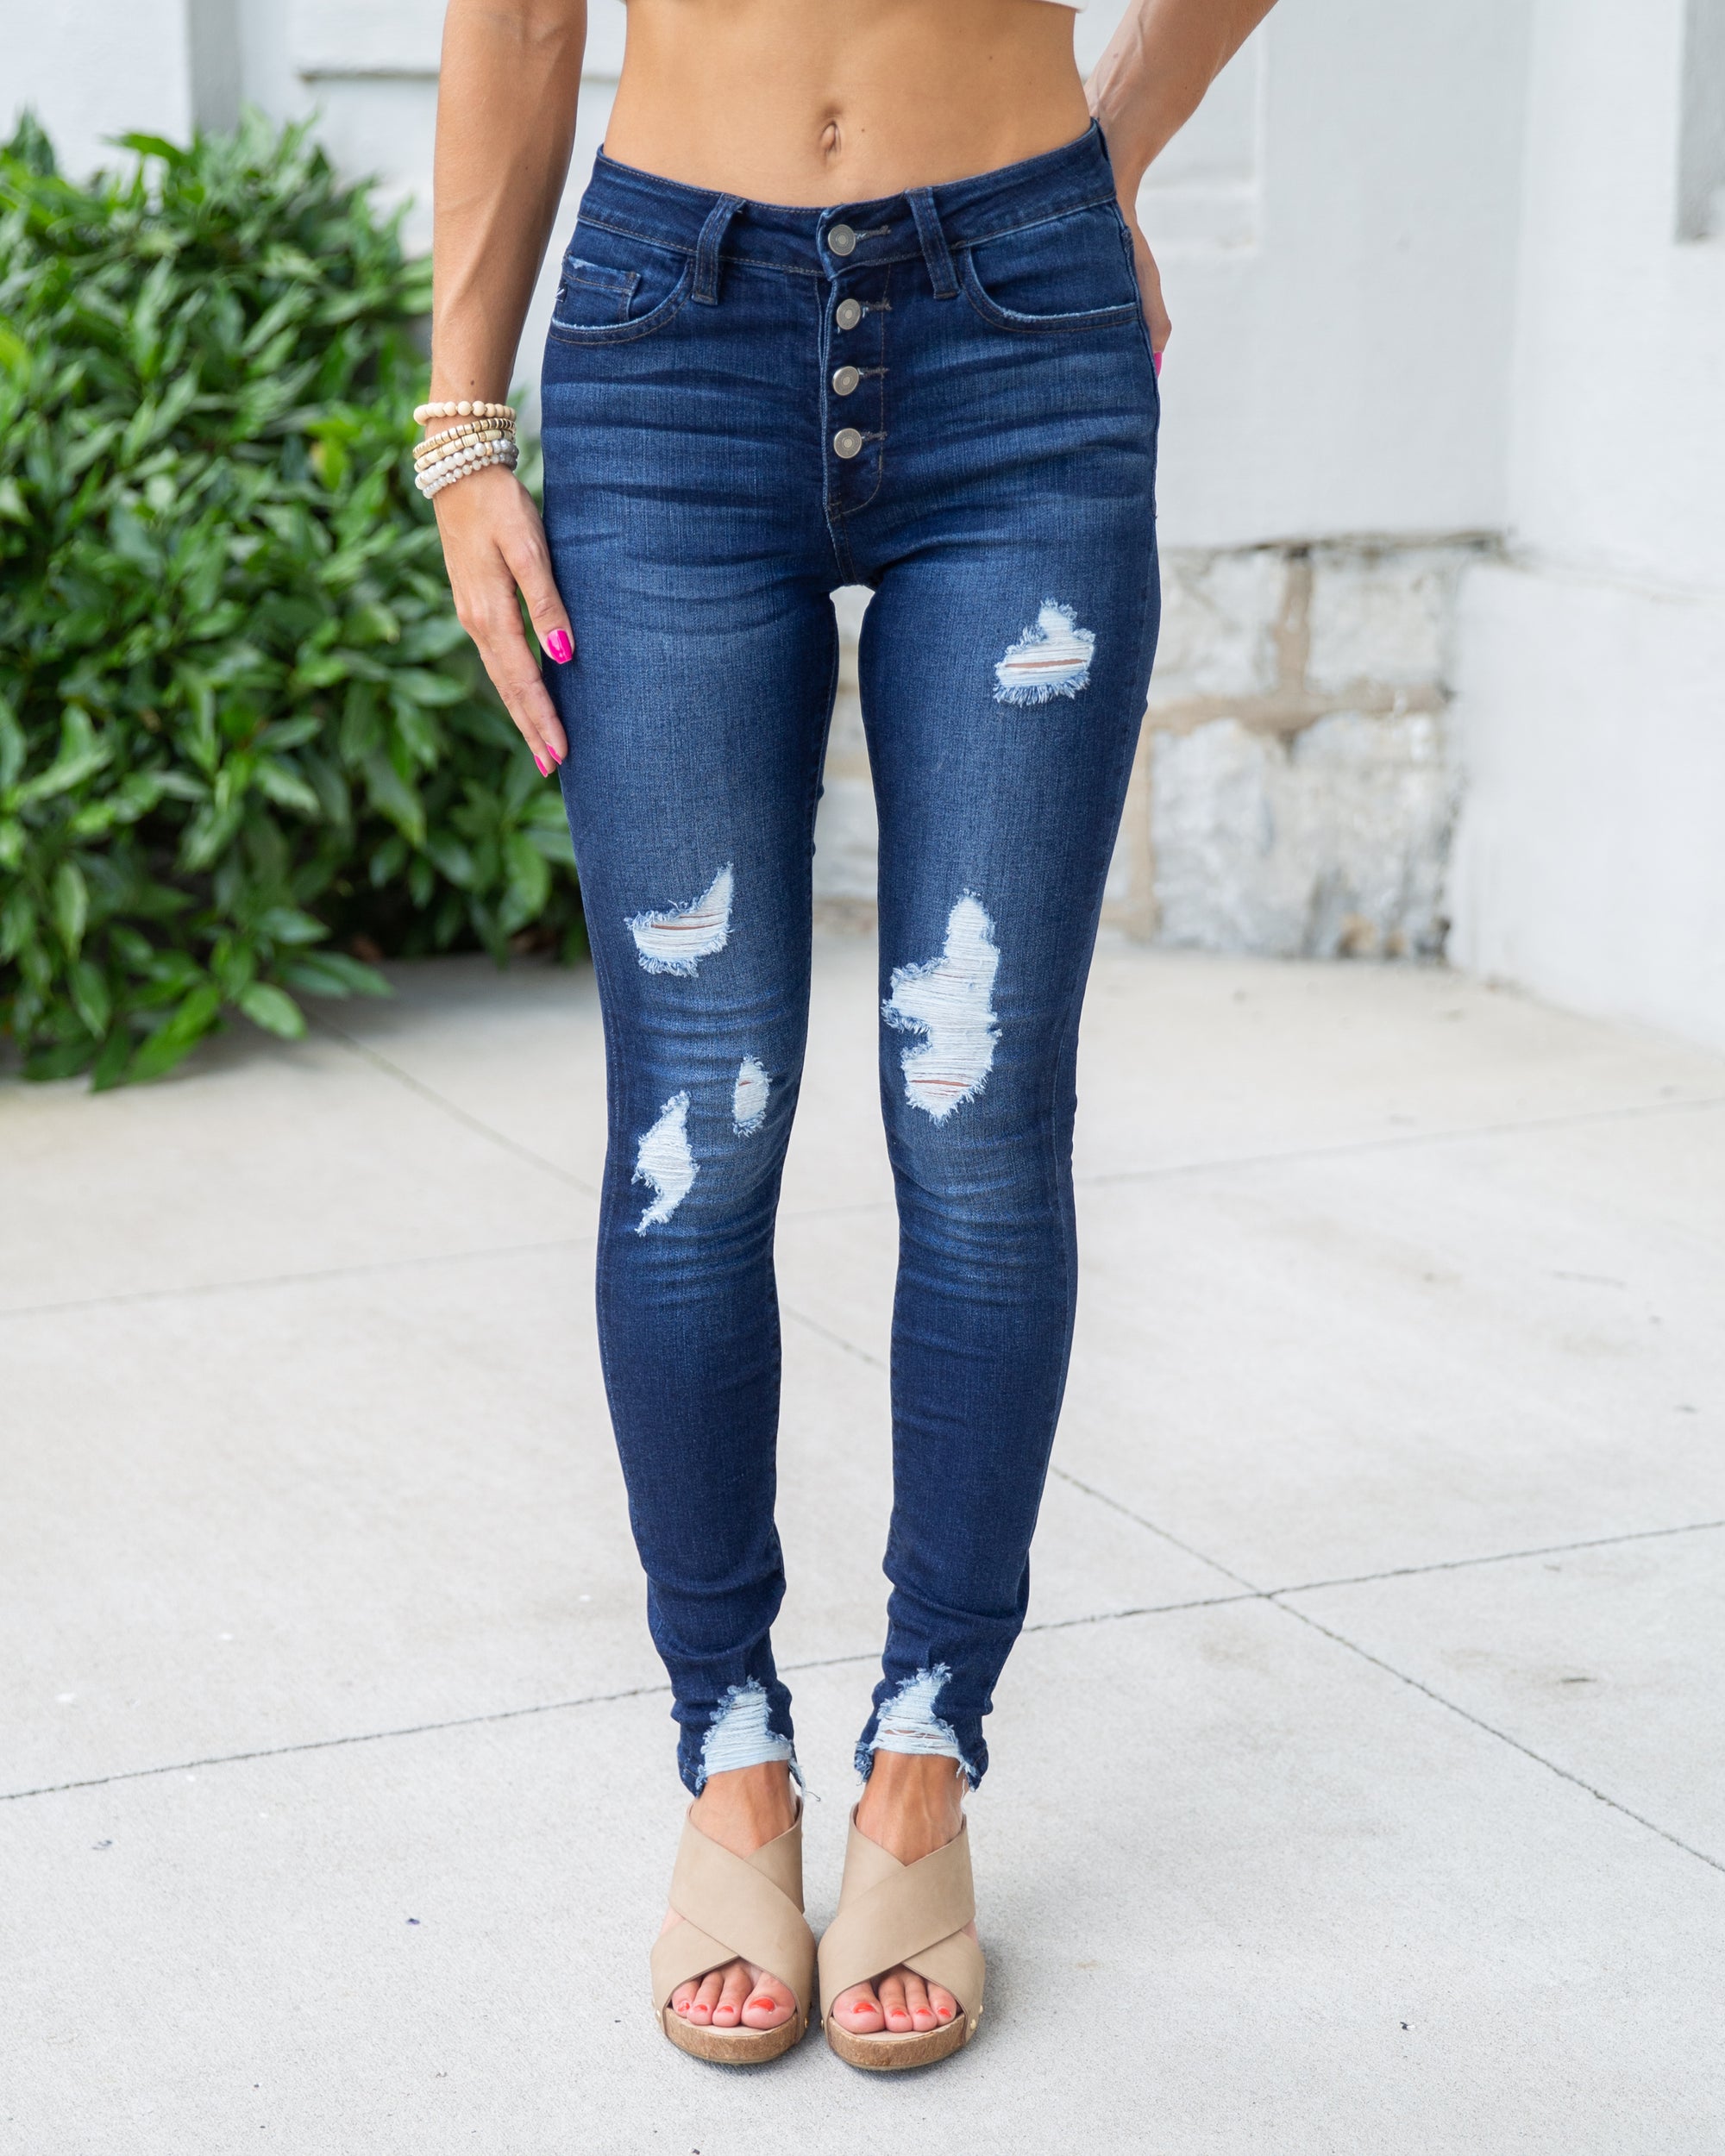 button up front jeans